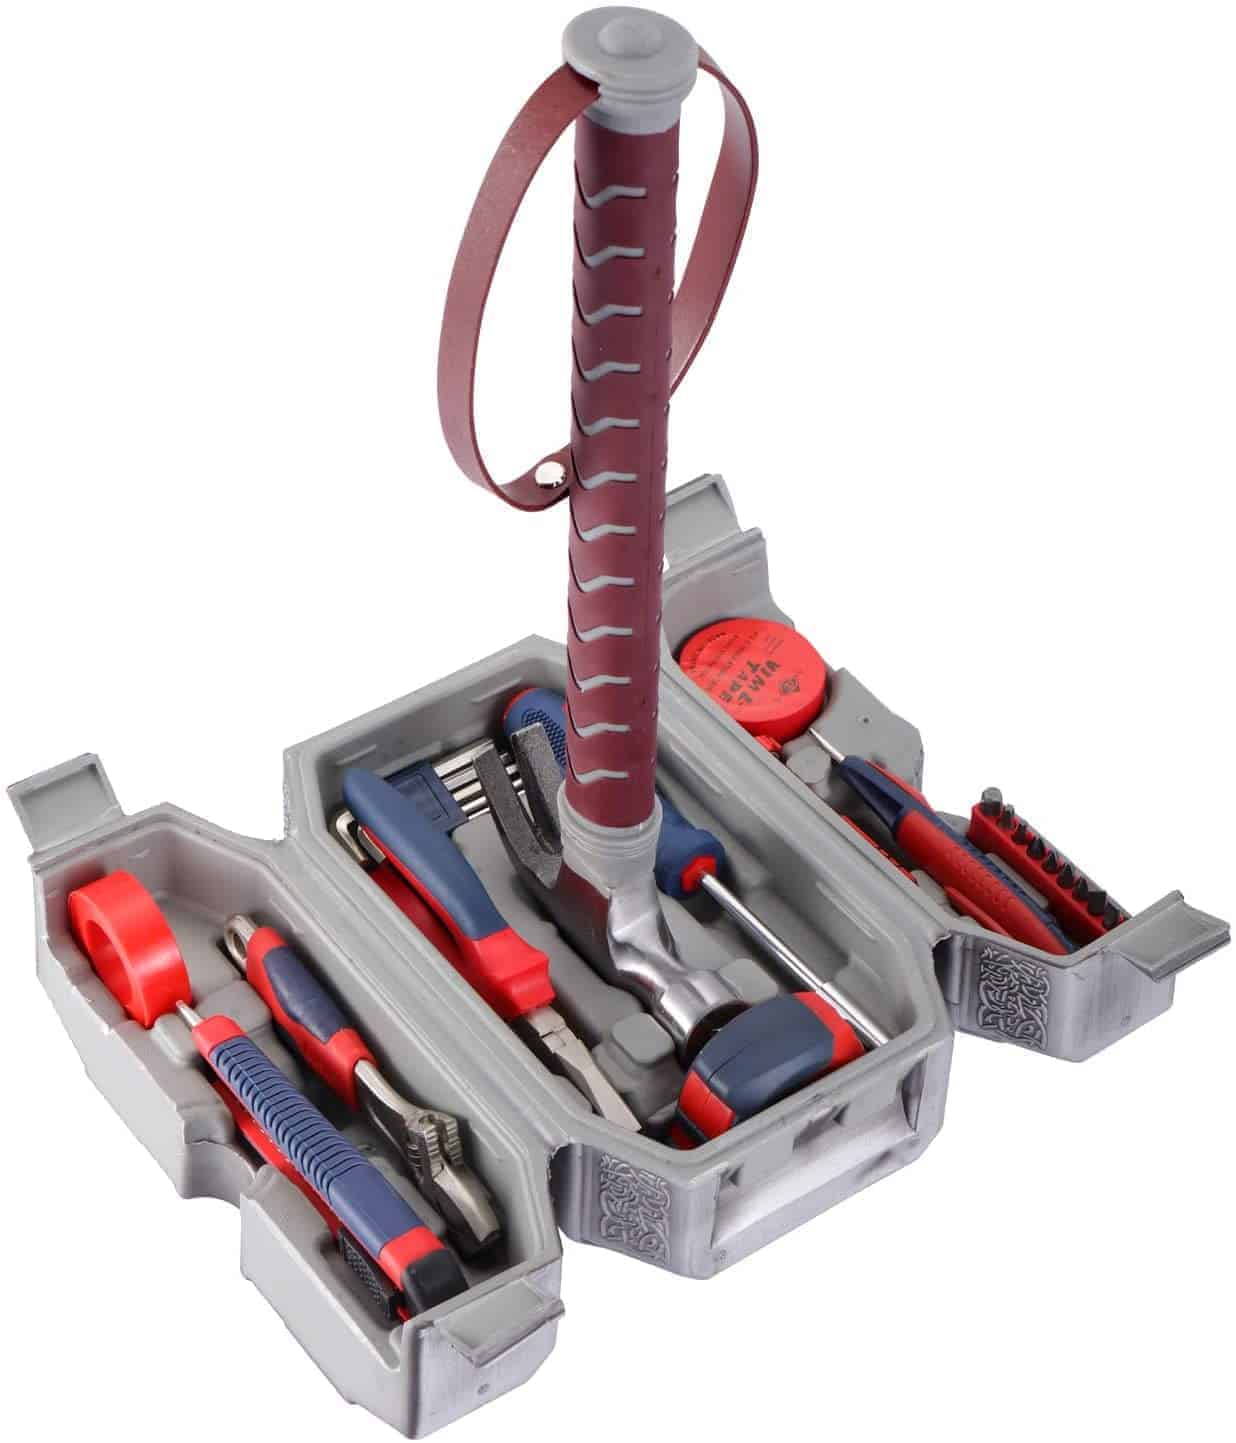 Avengers-Tool-Kit-Thor-Hammer-Fathers-Day-Gift-Ideas